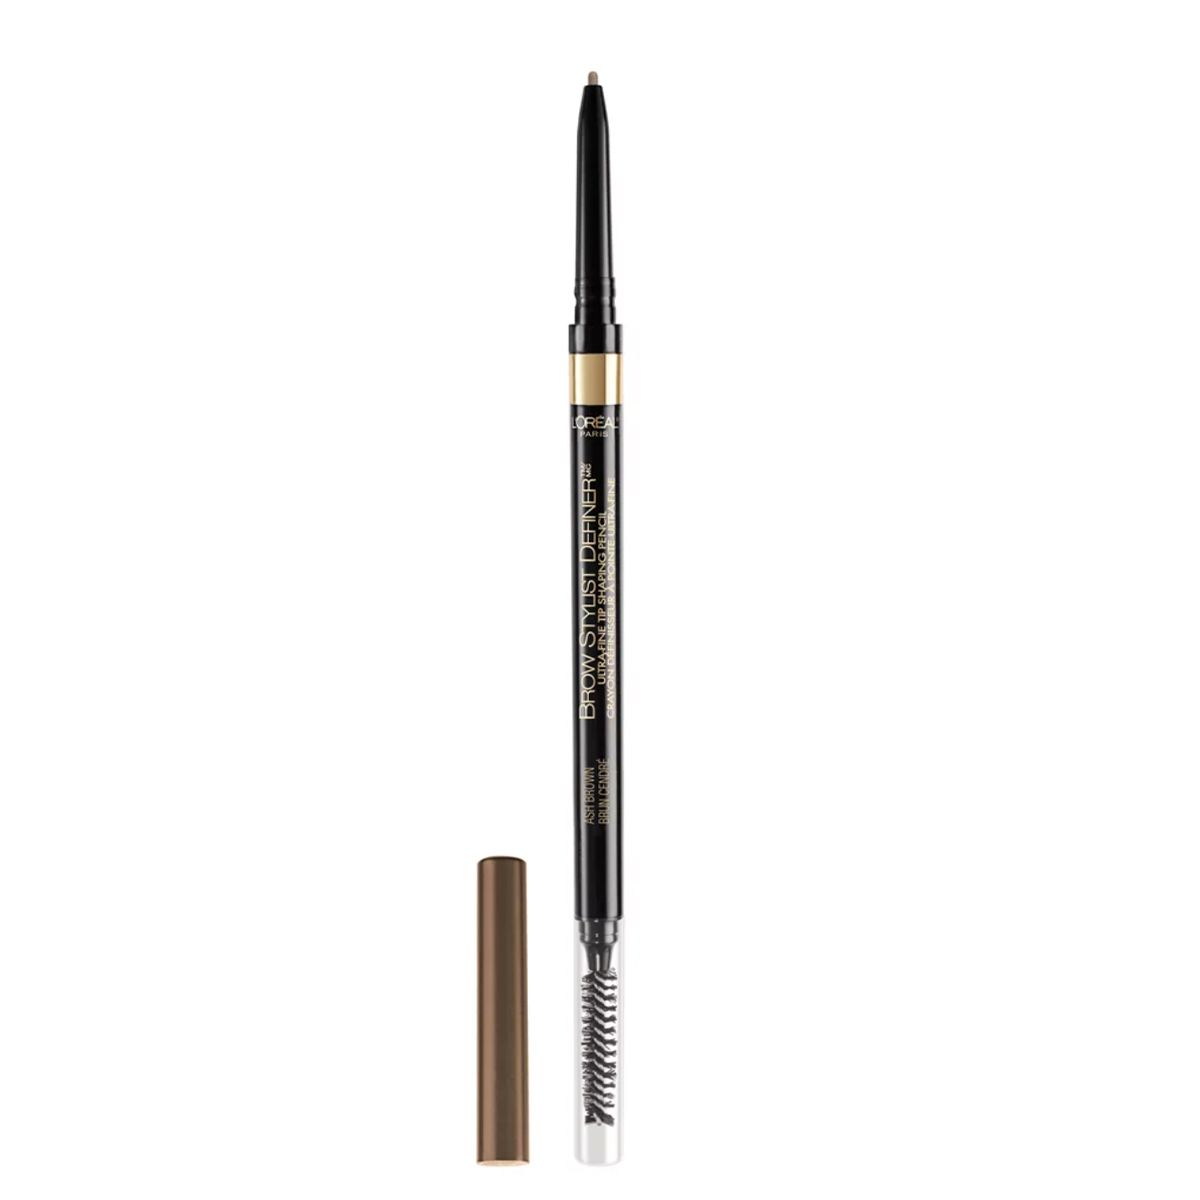 The 8 Best Waterproof Eyebrow Pencils for Flawless Arches | Who What Wear